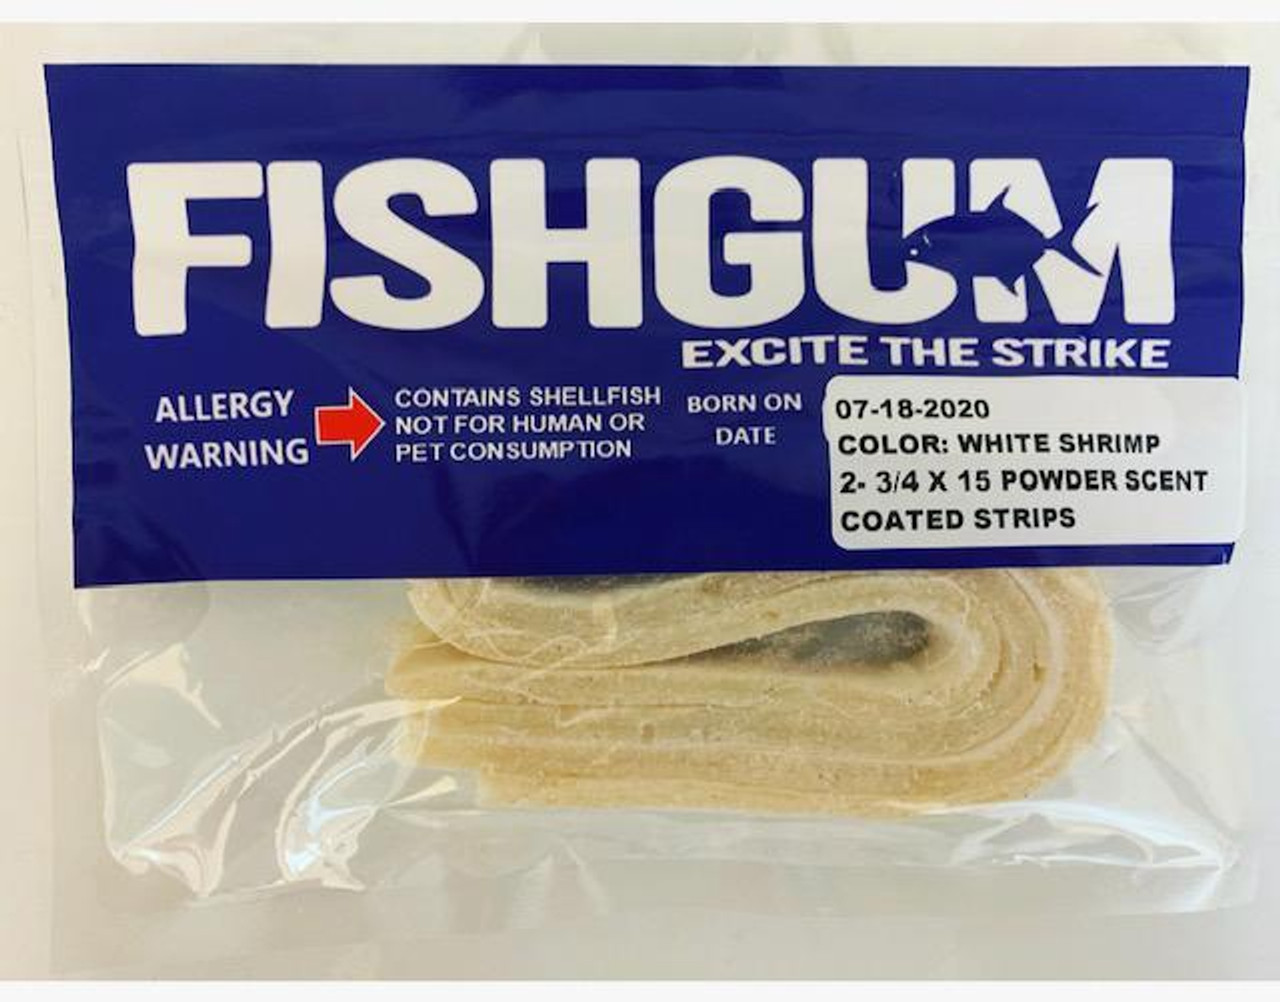 https://cdn11.bigcommerce.com/s-0xmhwue6/images/stencil/1280x1280/products/14416/66700/Fishgum-Scented-Strips-2-75-x-14-01303174_image9__17518.1684803698.jpg?c=2